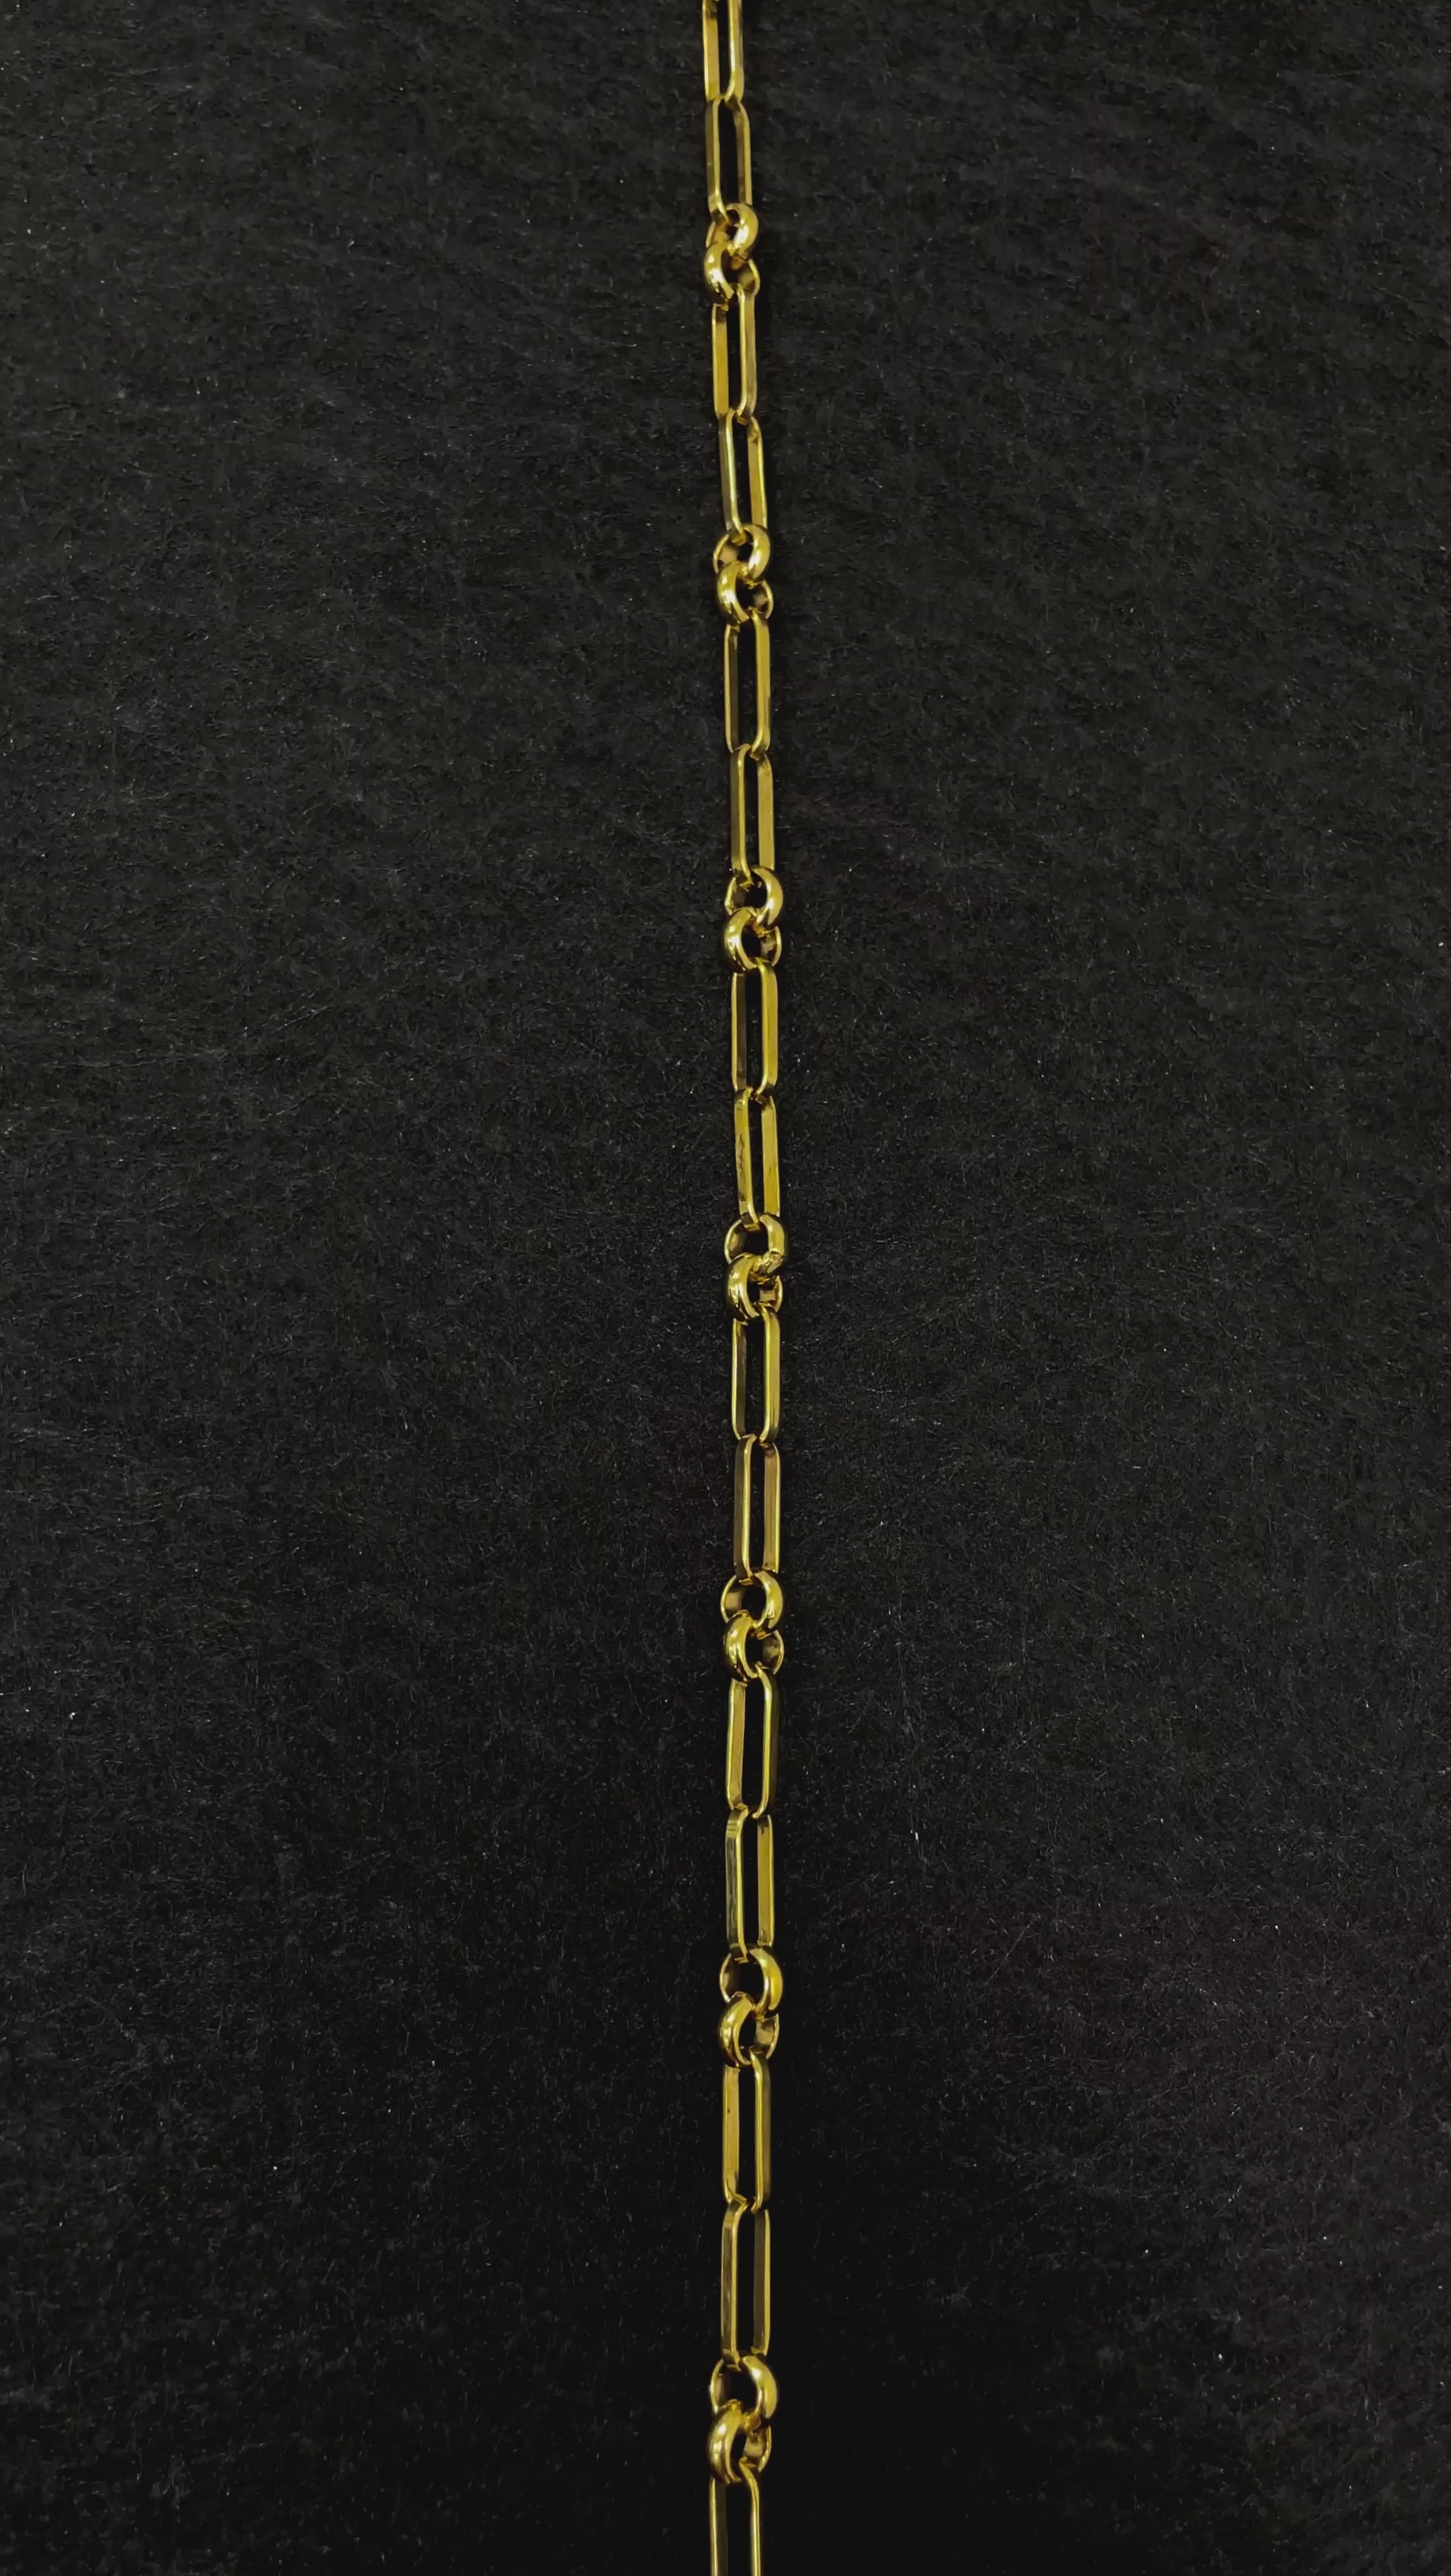 9 Carat Yellow Gold Solid Fancy Paper Clip Style Chain available at LeGassick Diamonds and Jewellery Gold Coast, Australia.